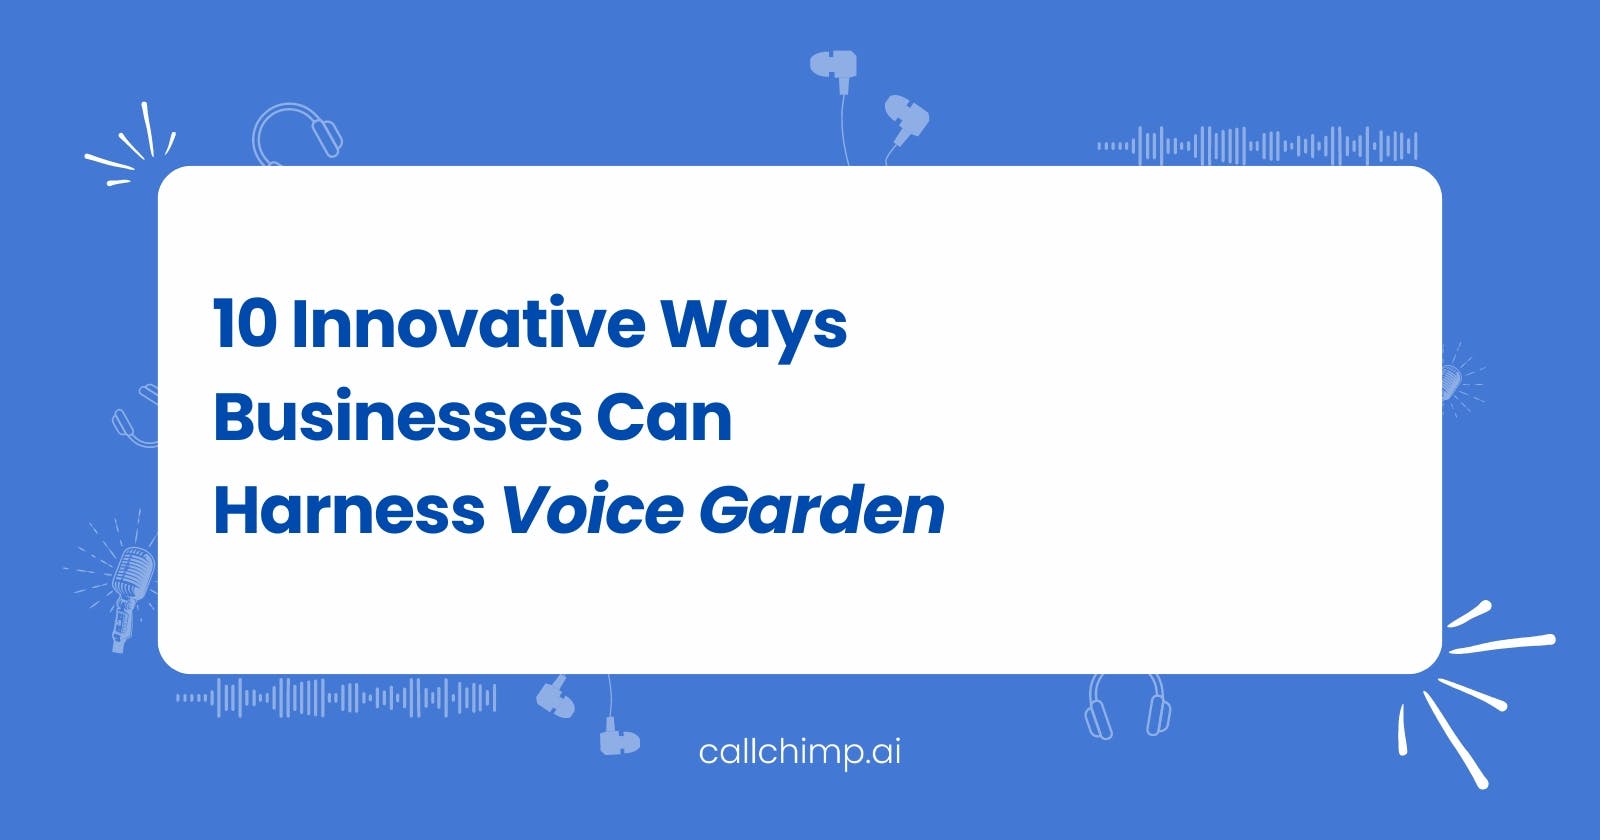 10 Innovative Ways Businesses Can Harness Voice Garden